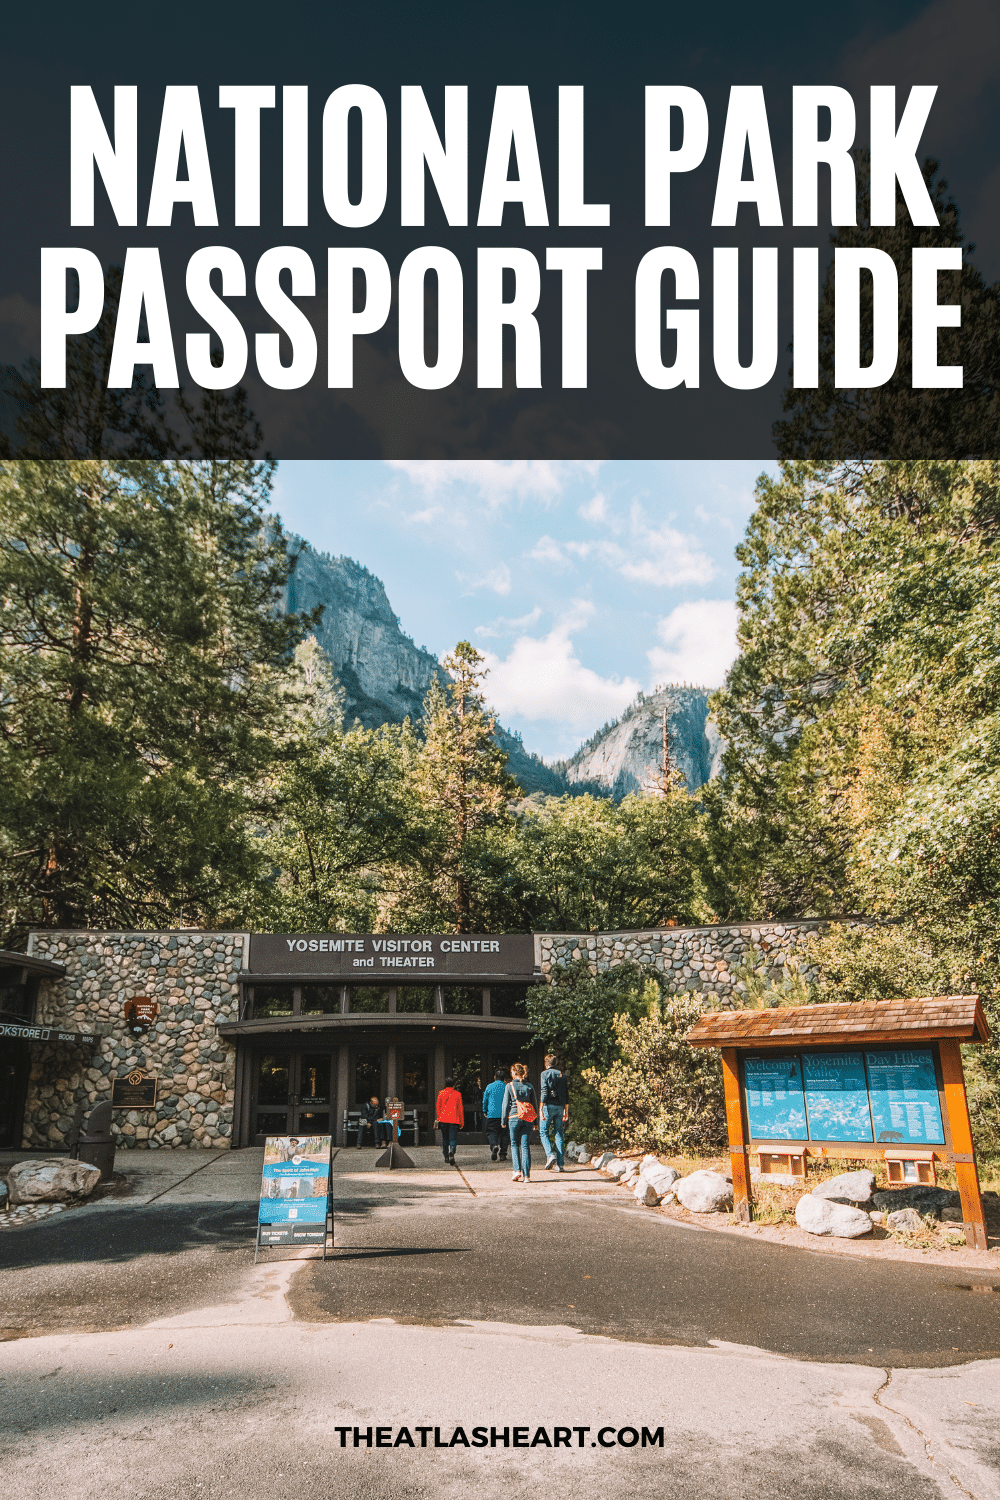 National Park Passport Guide: Which One to Get and How to Use it